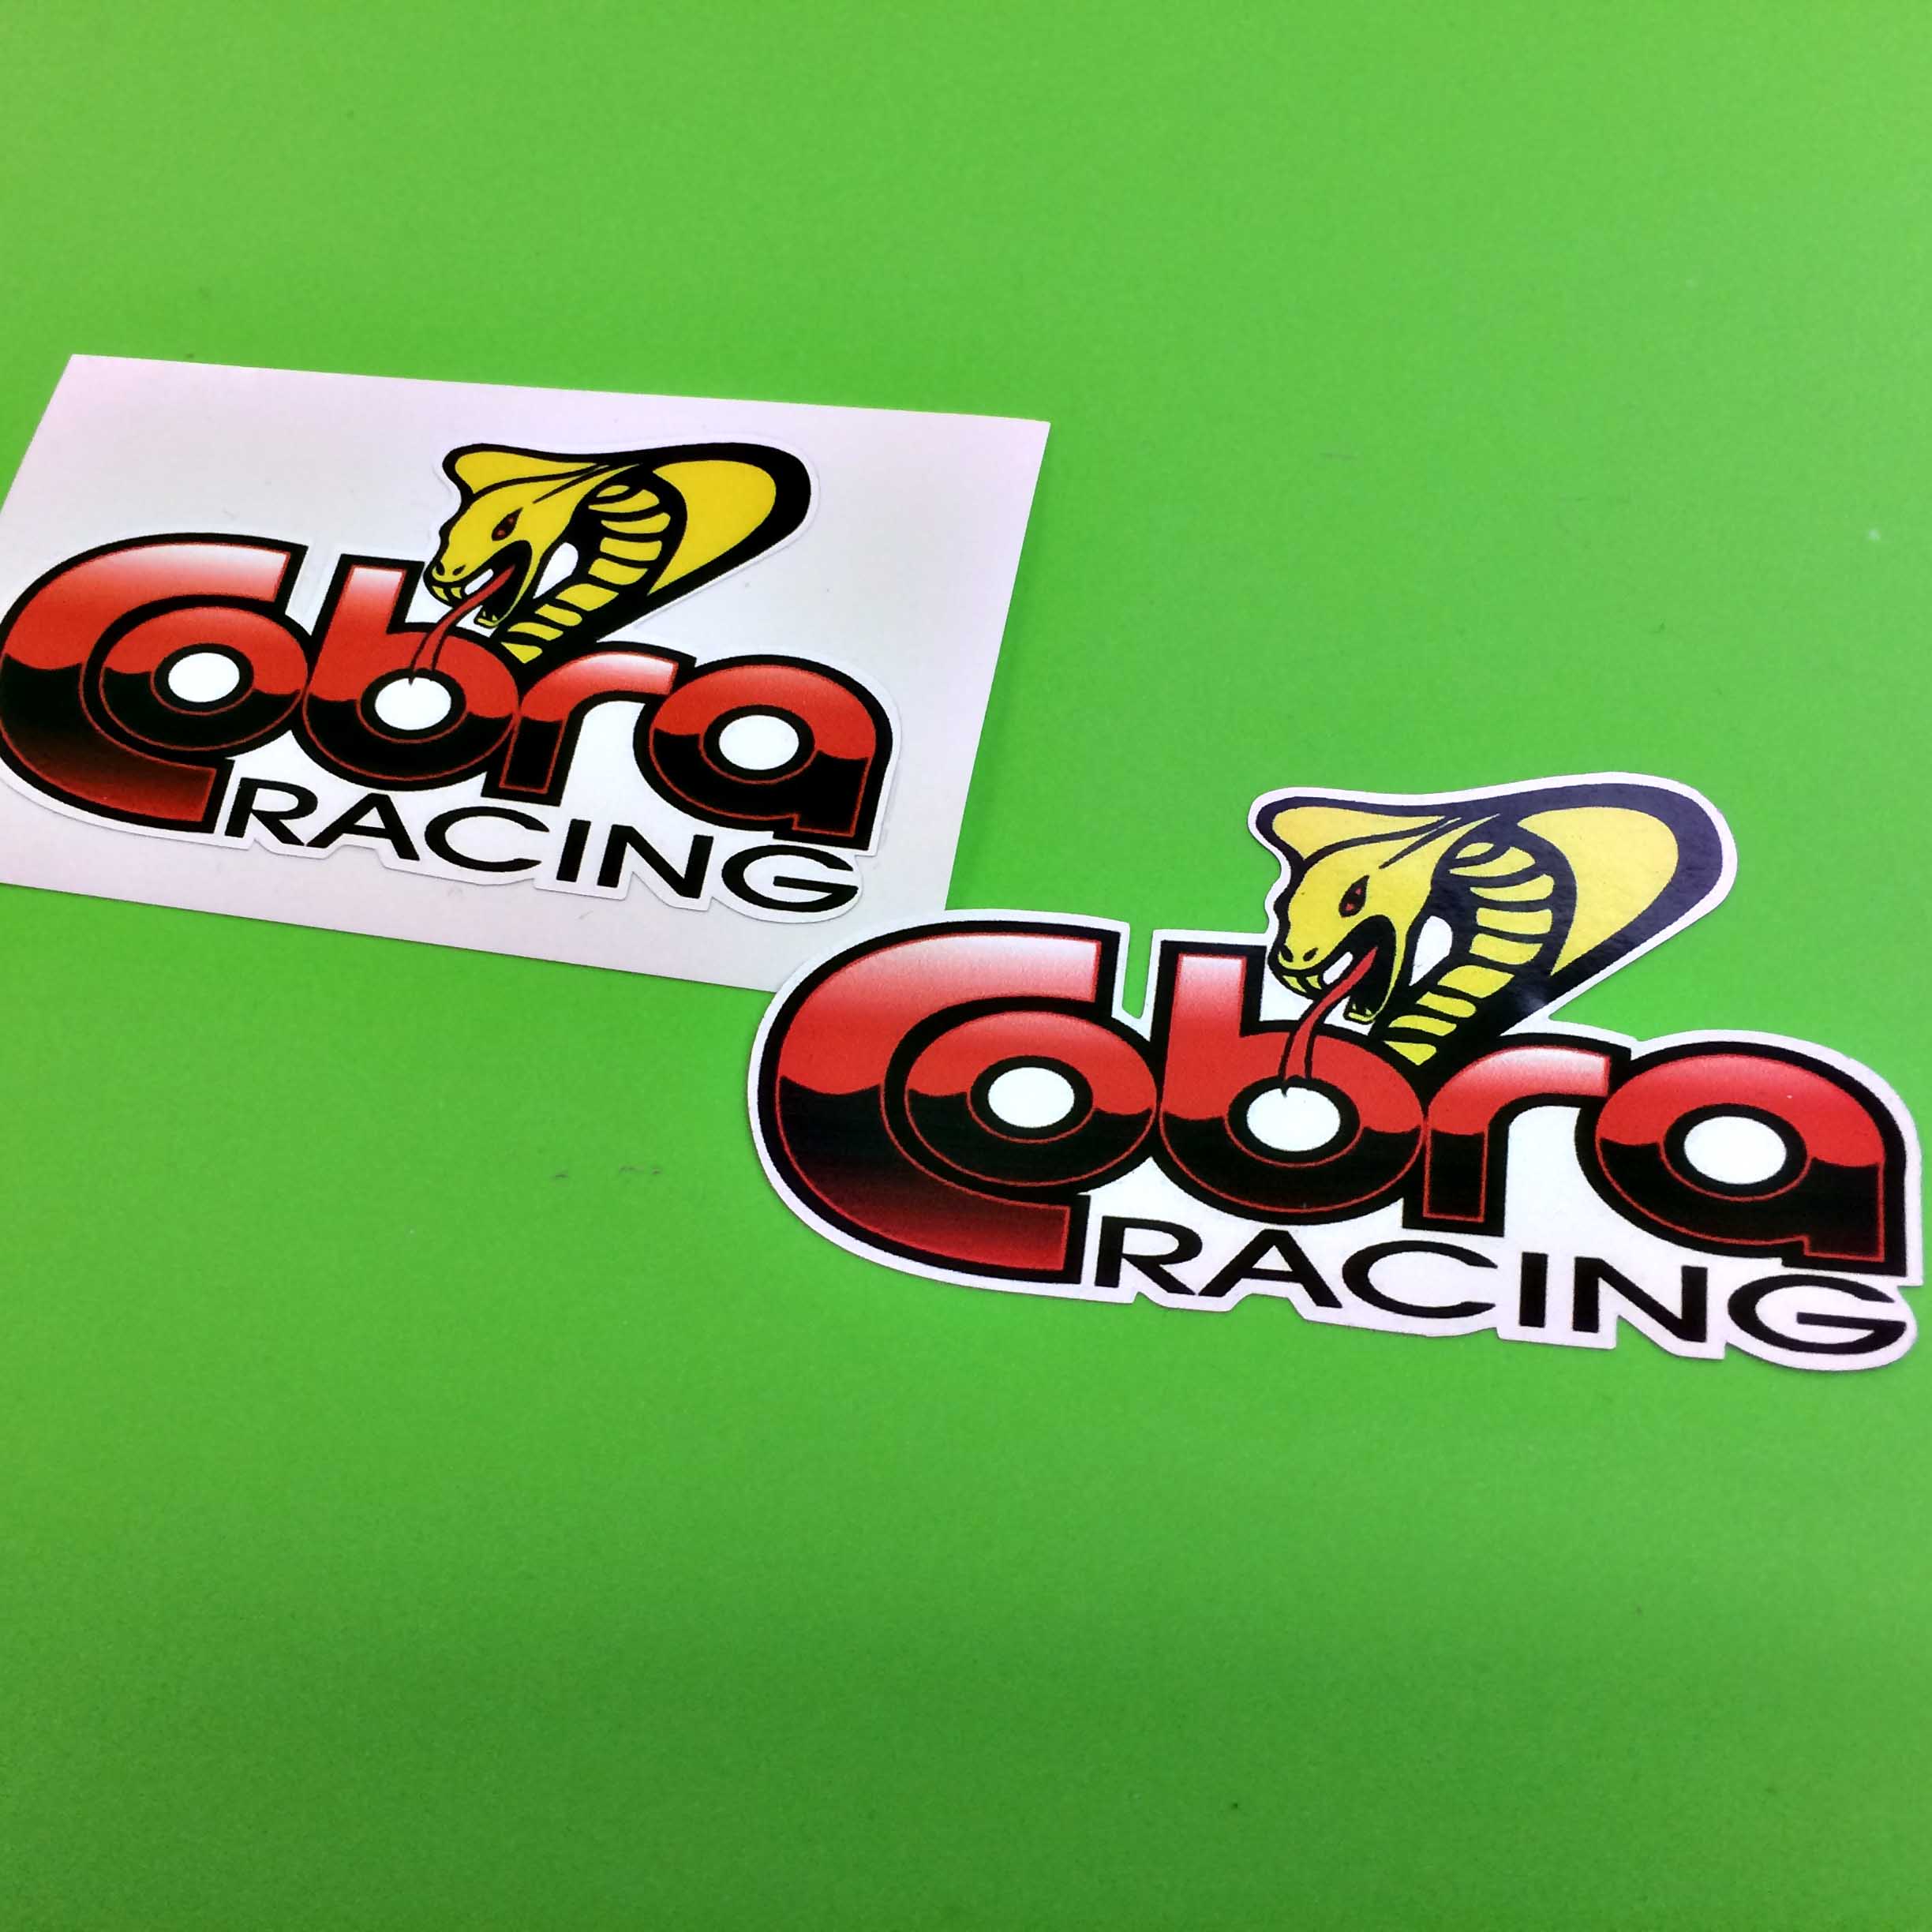 COBRA RACING STICKERS. Cobra in bold red lettering, Racing in black lettering below. A yellow cobra with a red tongue sits between b and r in Cobra.